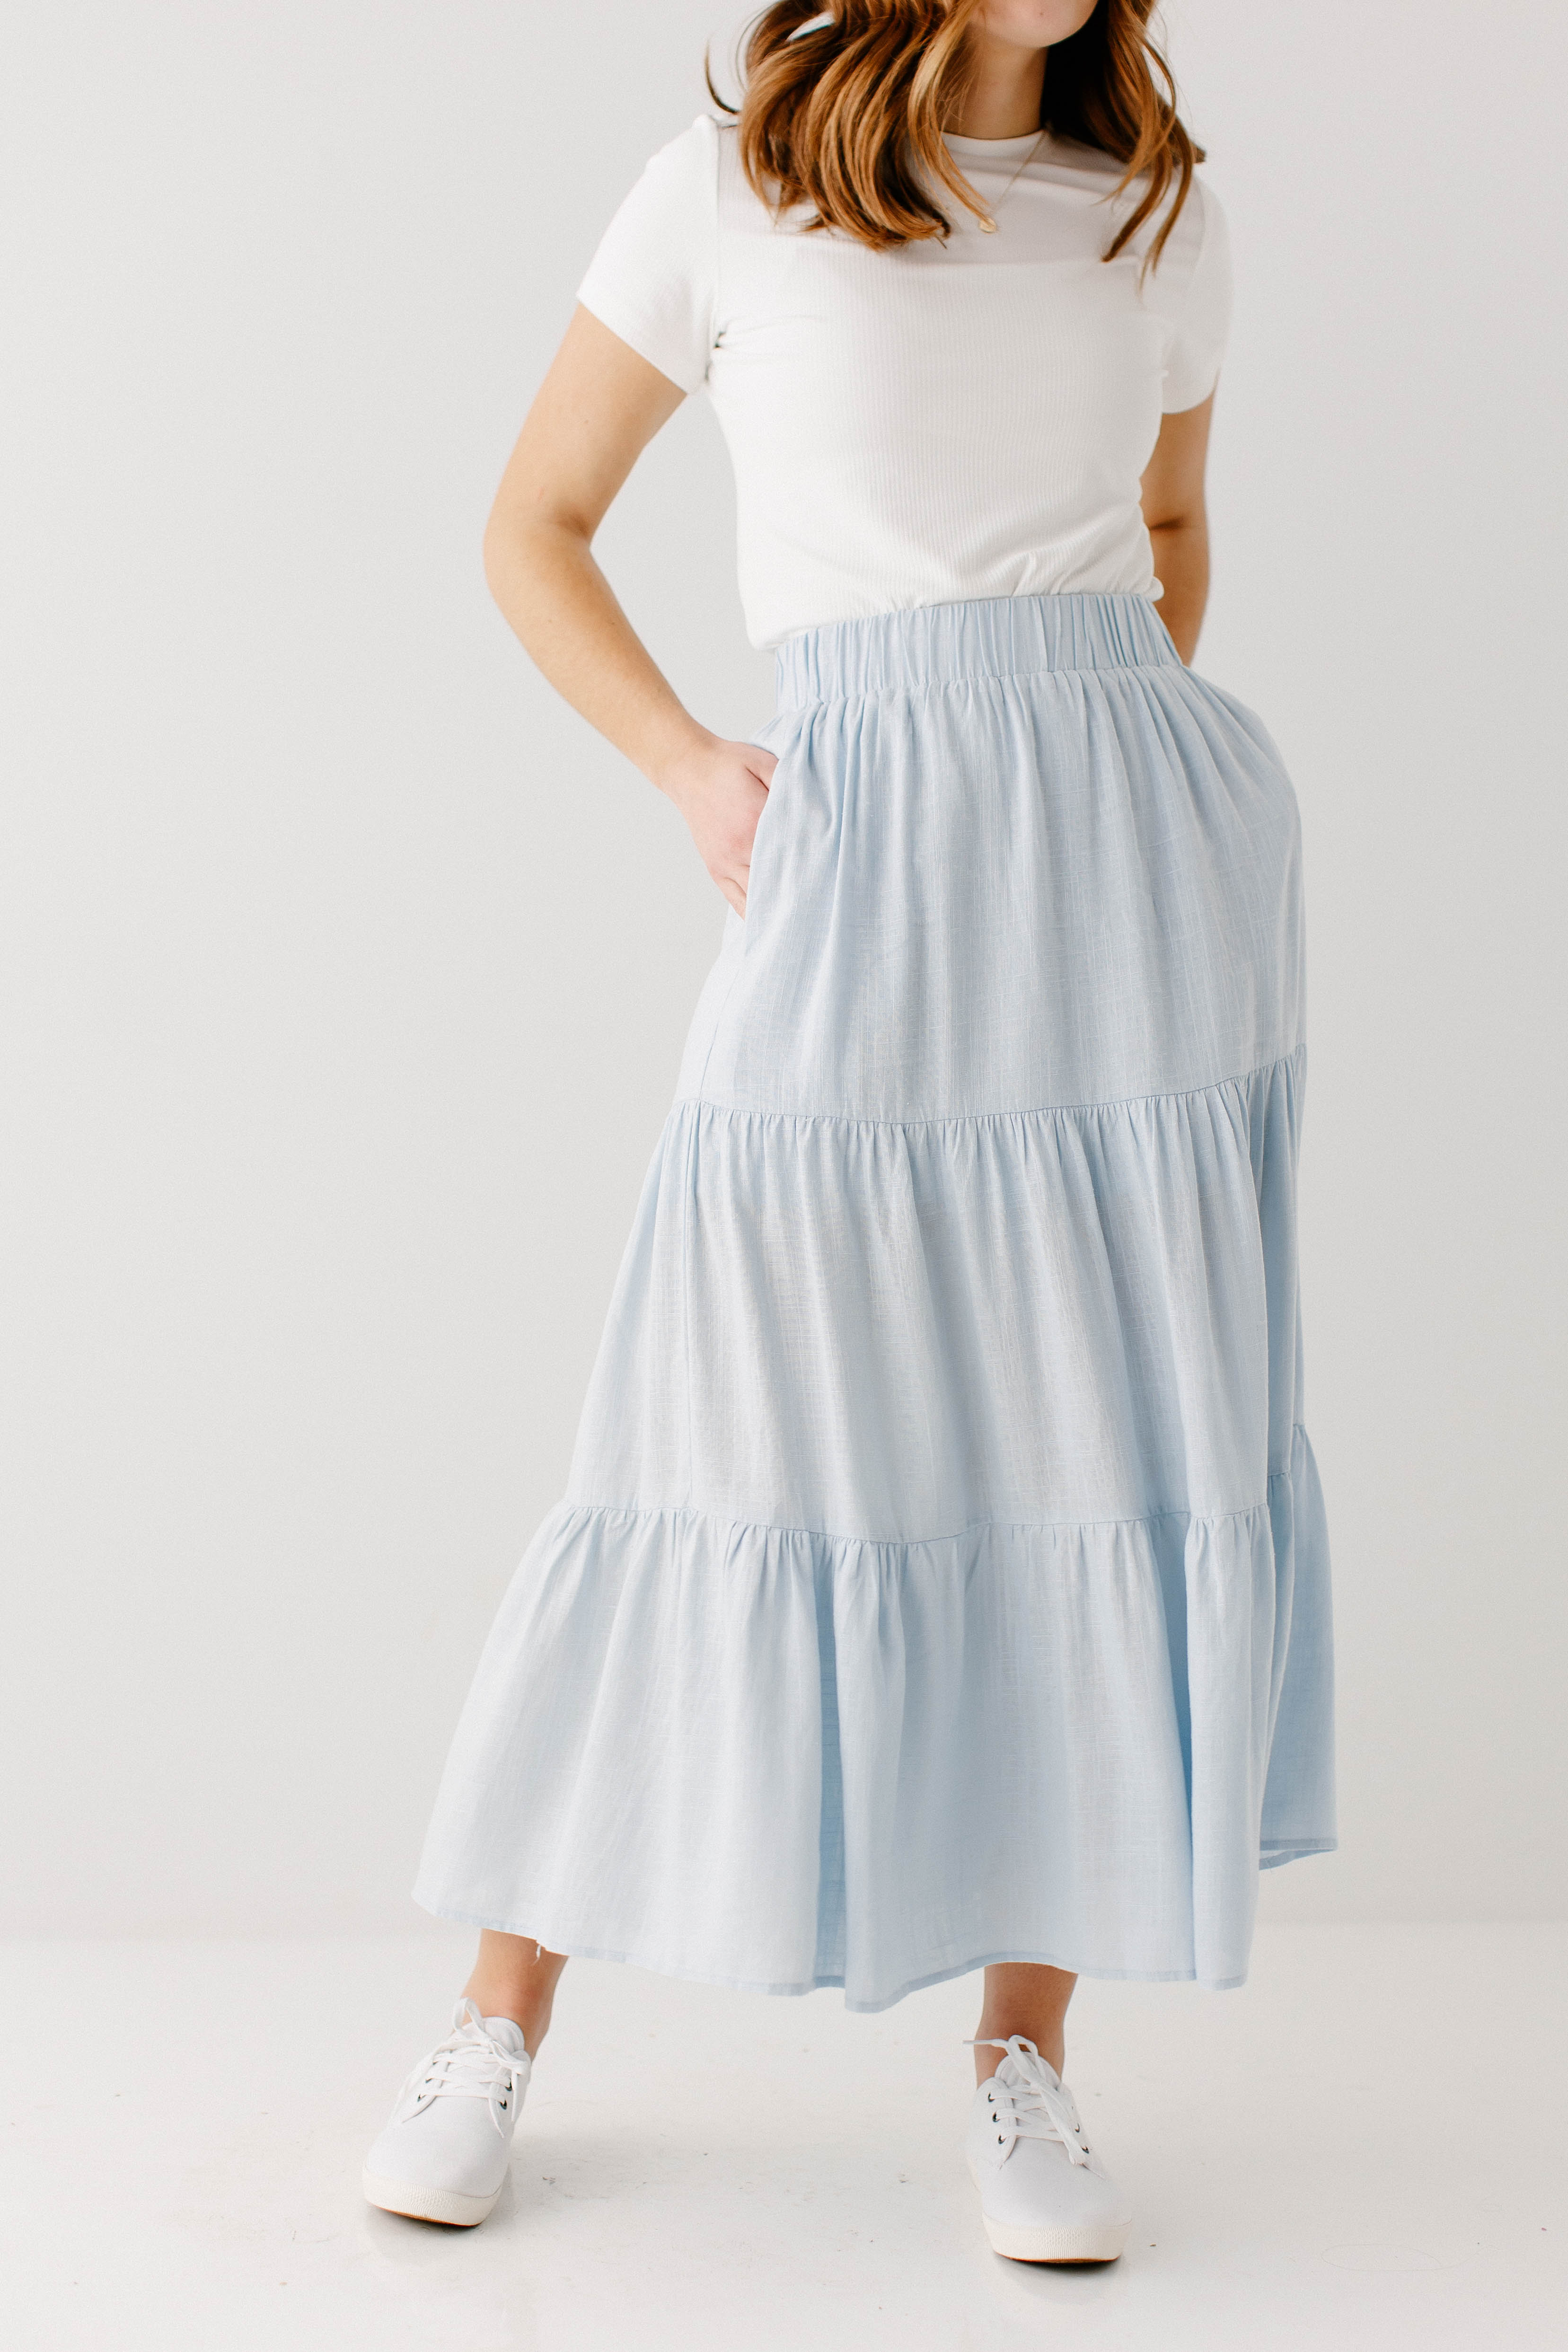 Modest Skirts | Modest Skirt Outfits | The Main Street Exchange – Page 2